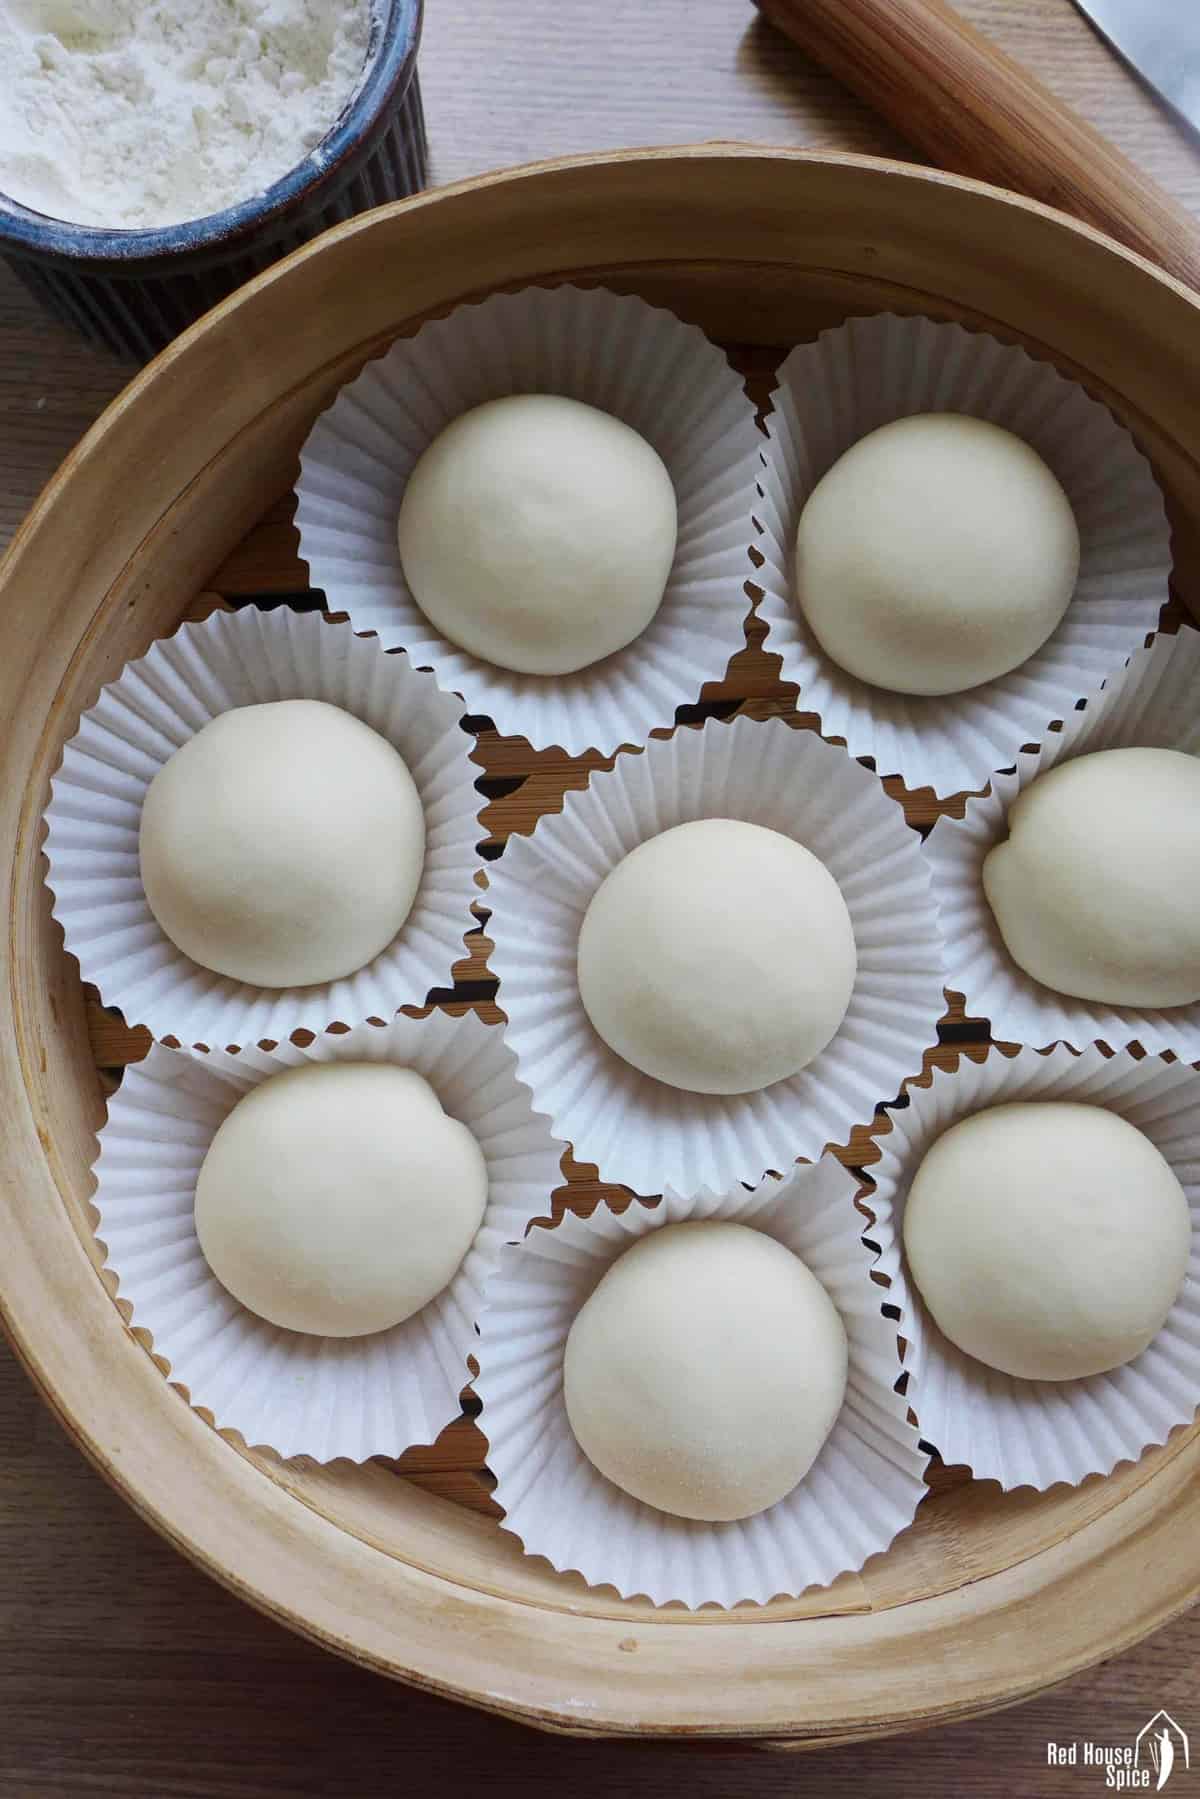 uncooked buns in a steamer